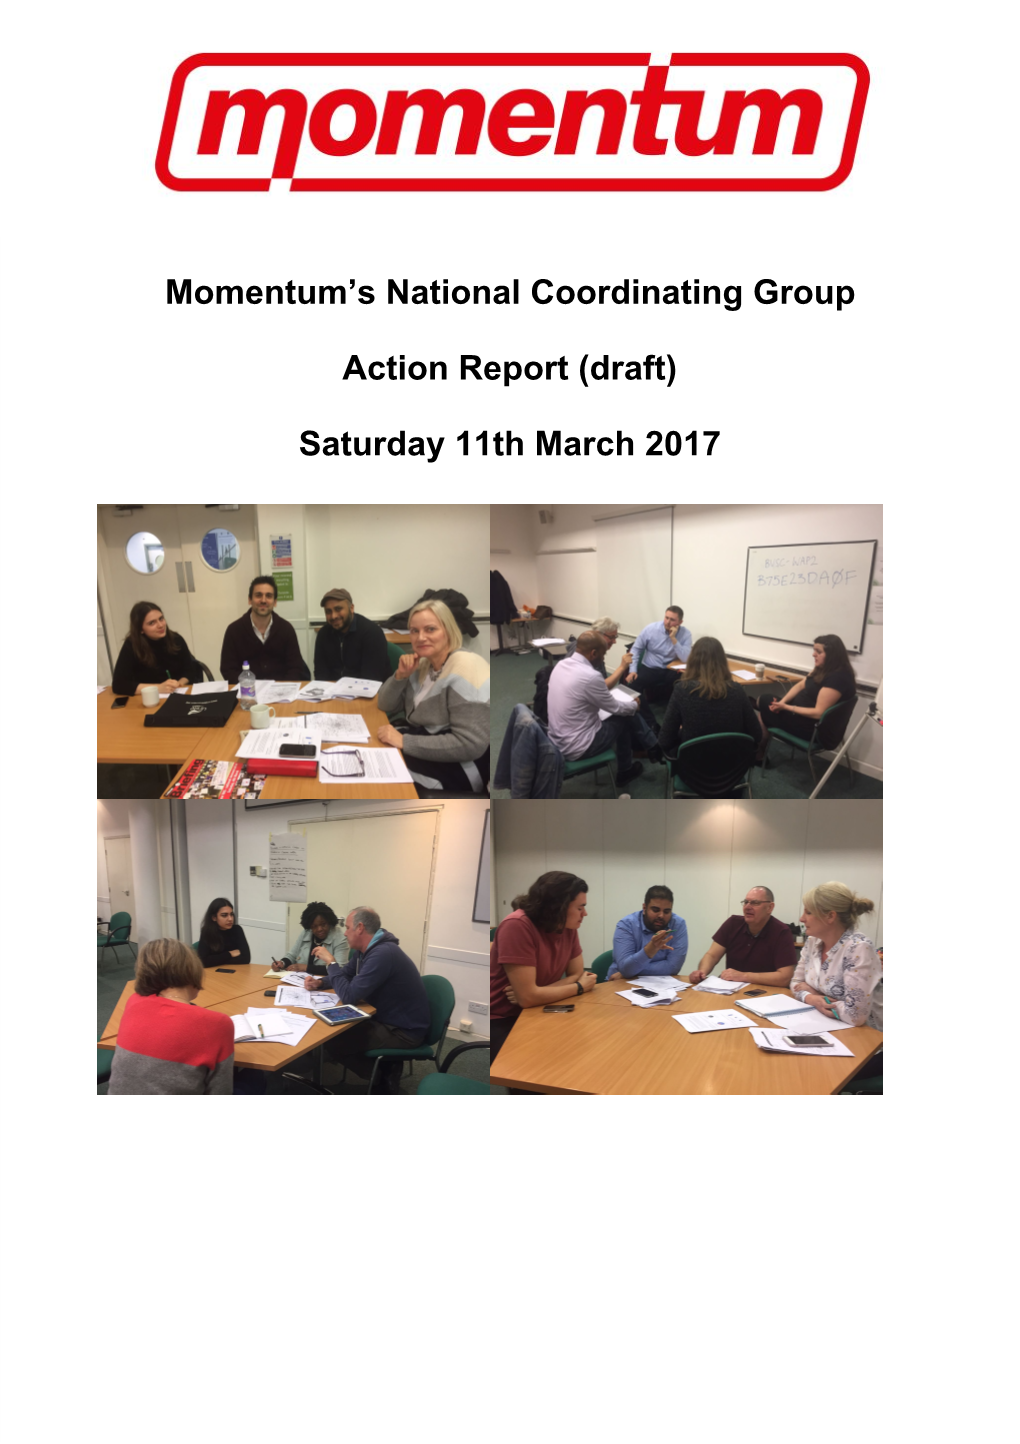 Momentum's National Coordinating Group Action Report (Draft)